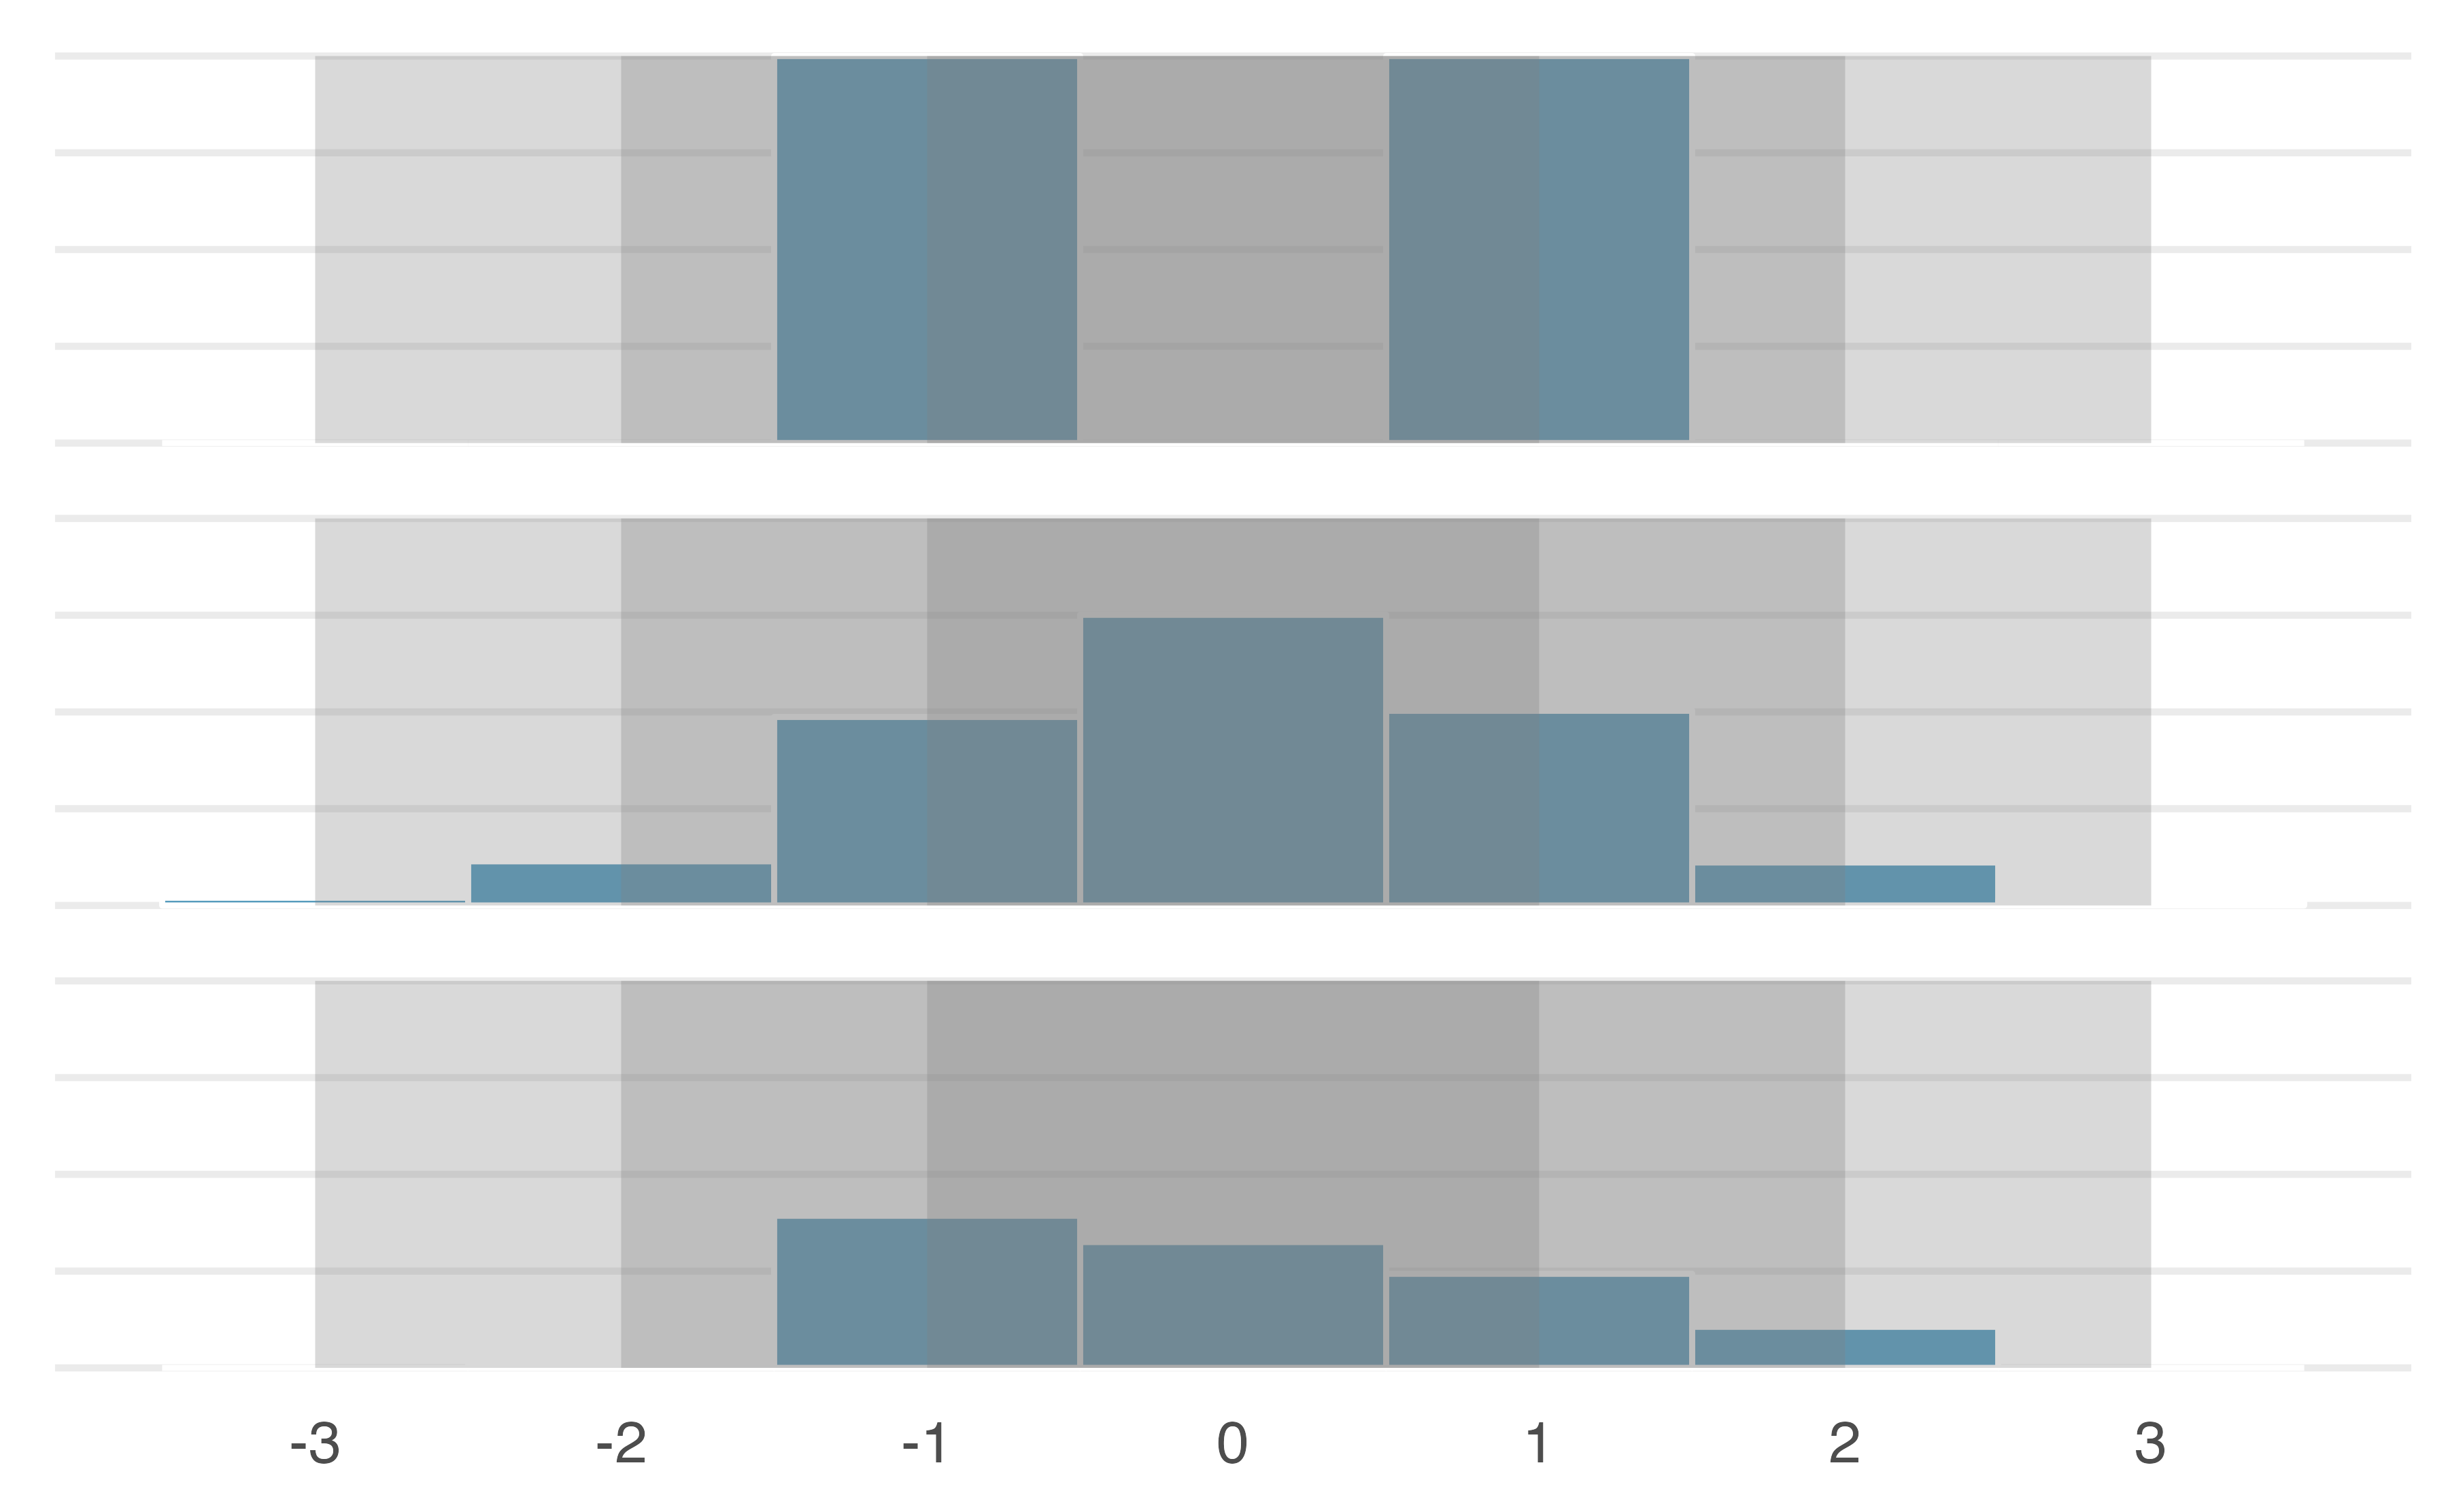 Three very different population distributions with the same mean (0) and standard deviation (1).